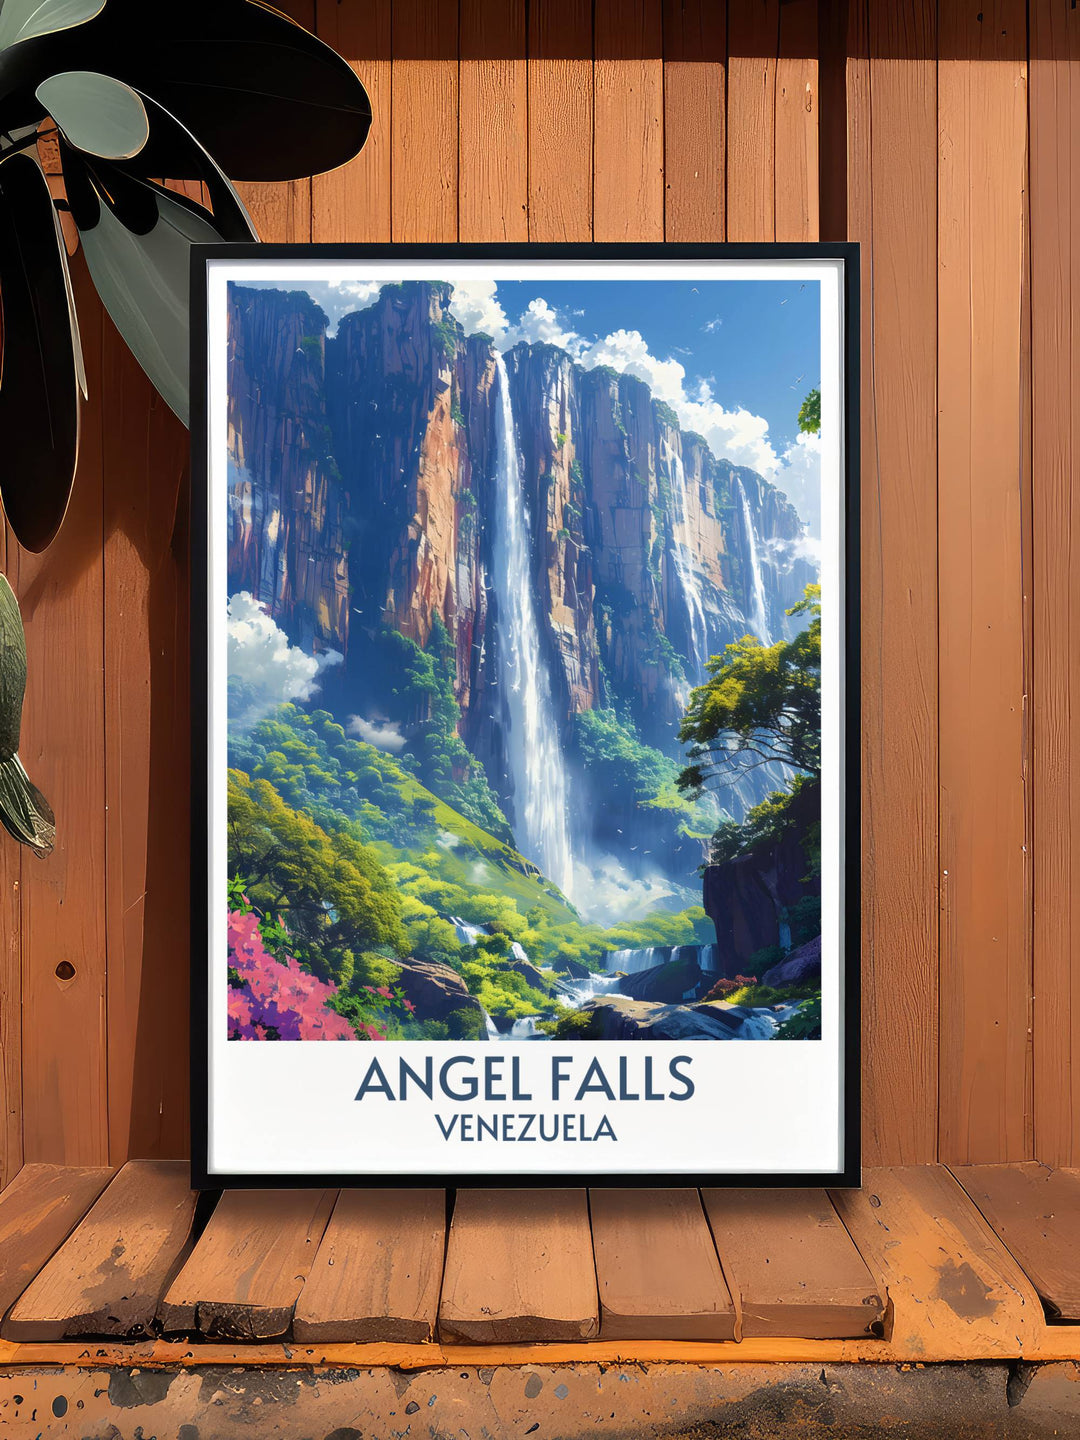 Vibrant depiction of Angel Falls in Venezuela, perfect for enhancing any room with a touch of nature's majesty.